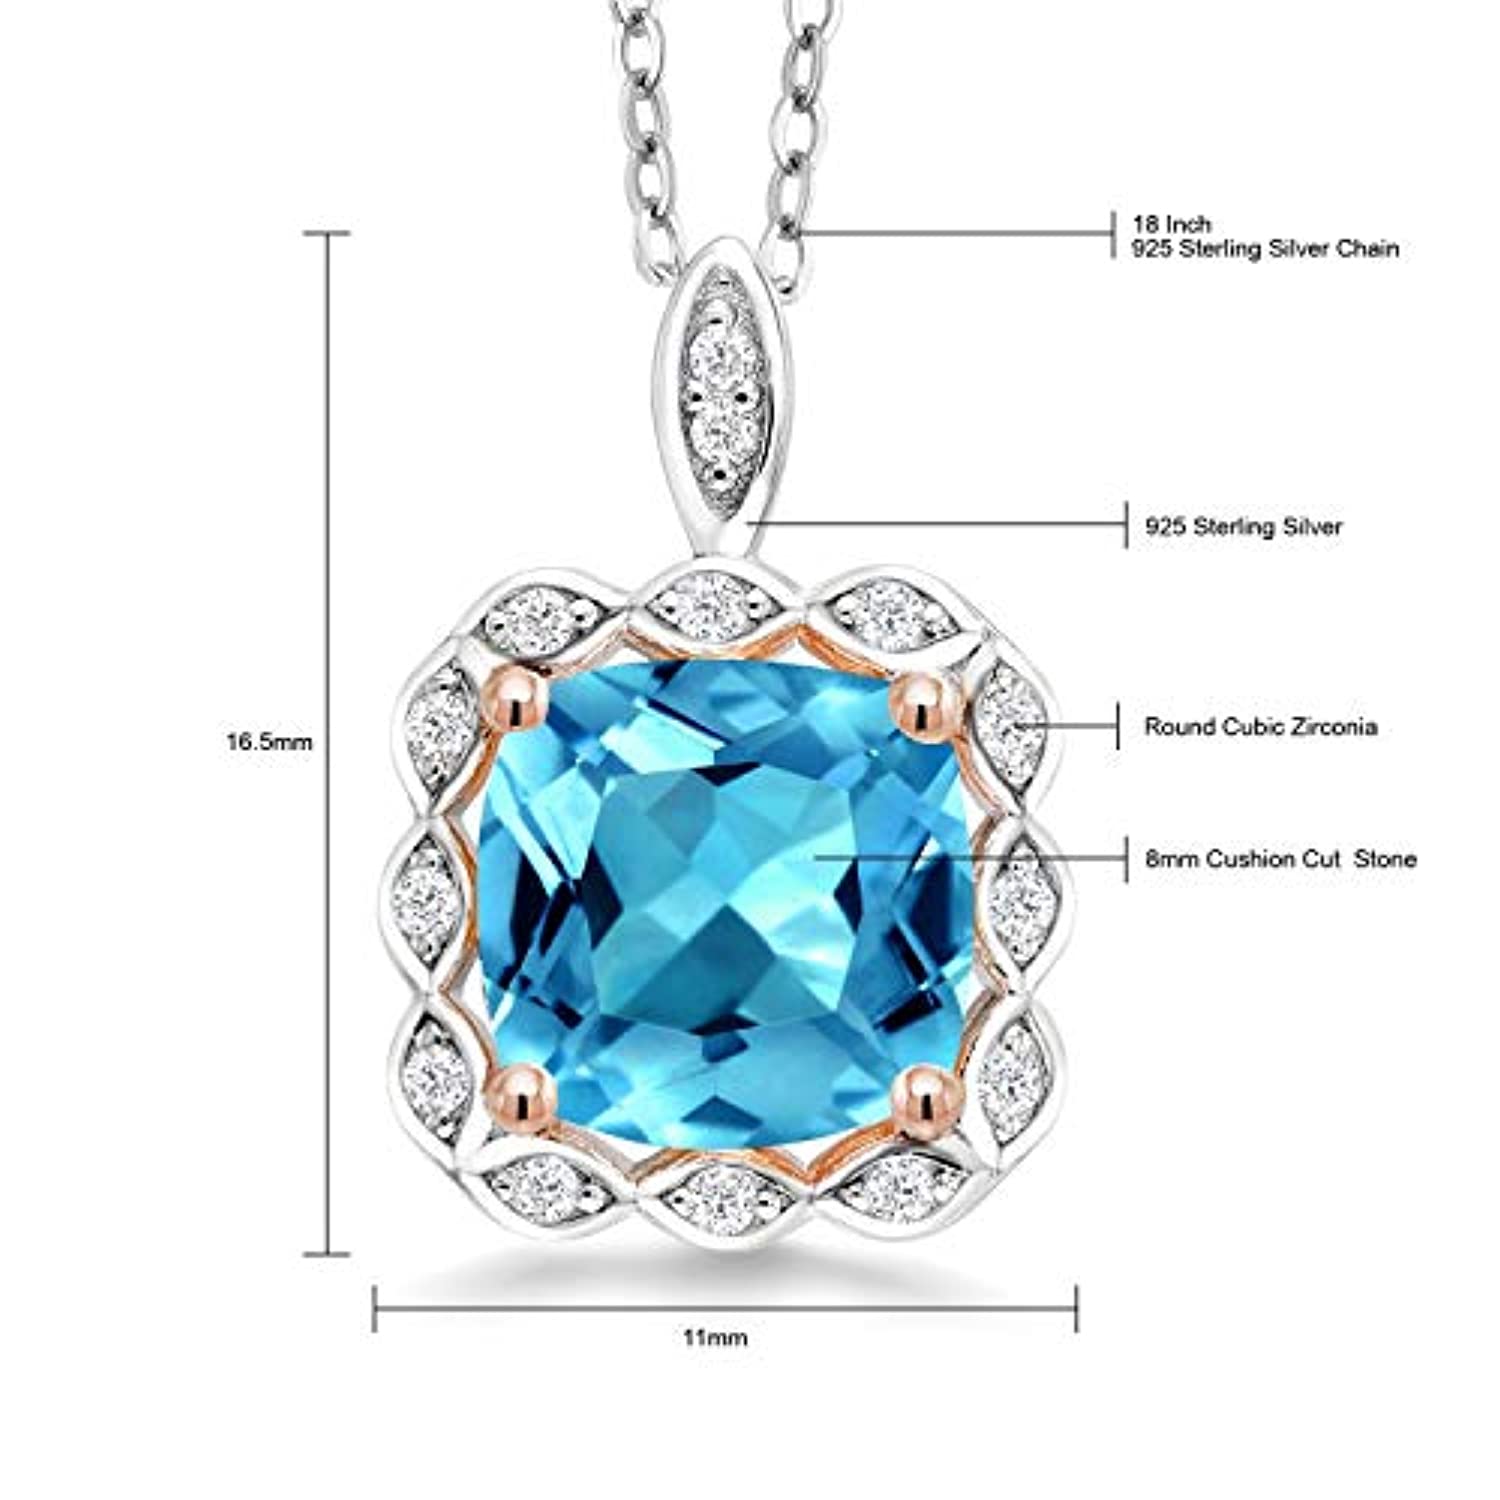 925 Sterling Silver Natural Swiss Blue Topaz Pendant Necklace, 8MM Cushion Cut, 2.91 Total Carat Weight with 18 Inch Silver Chain